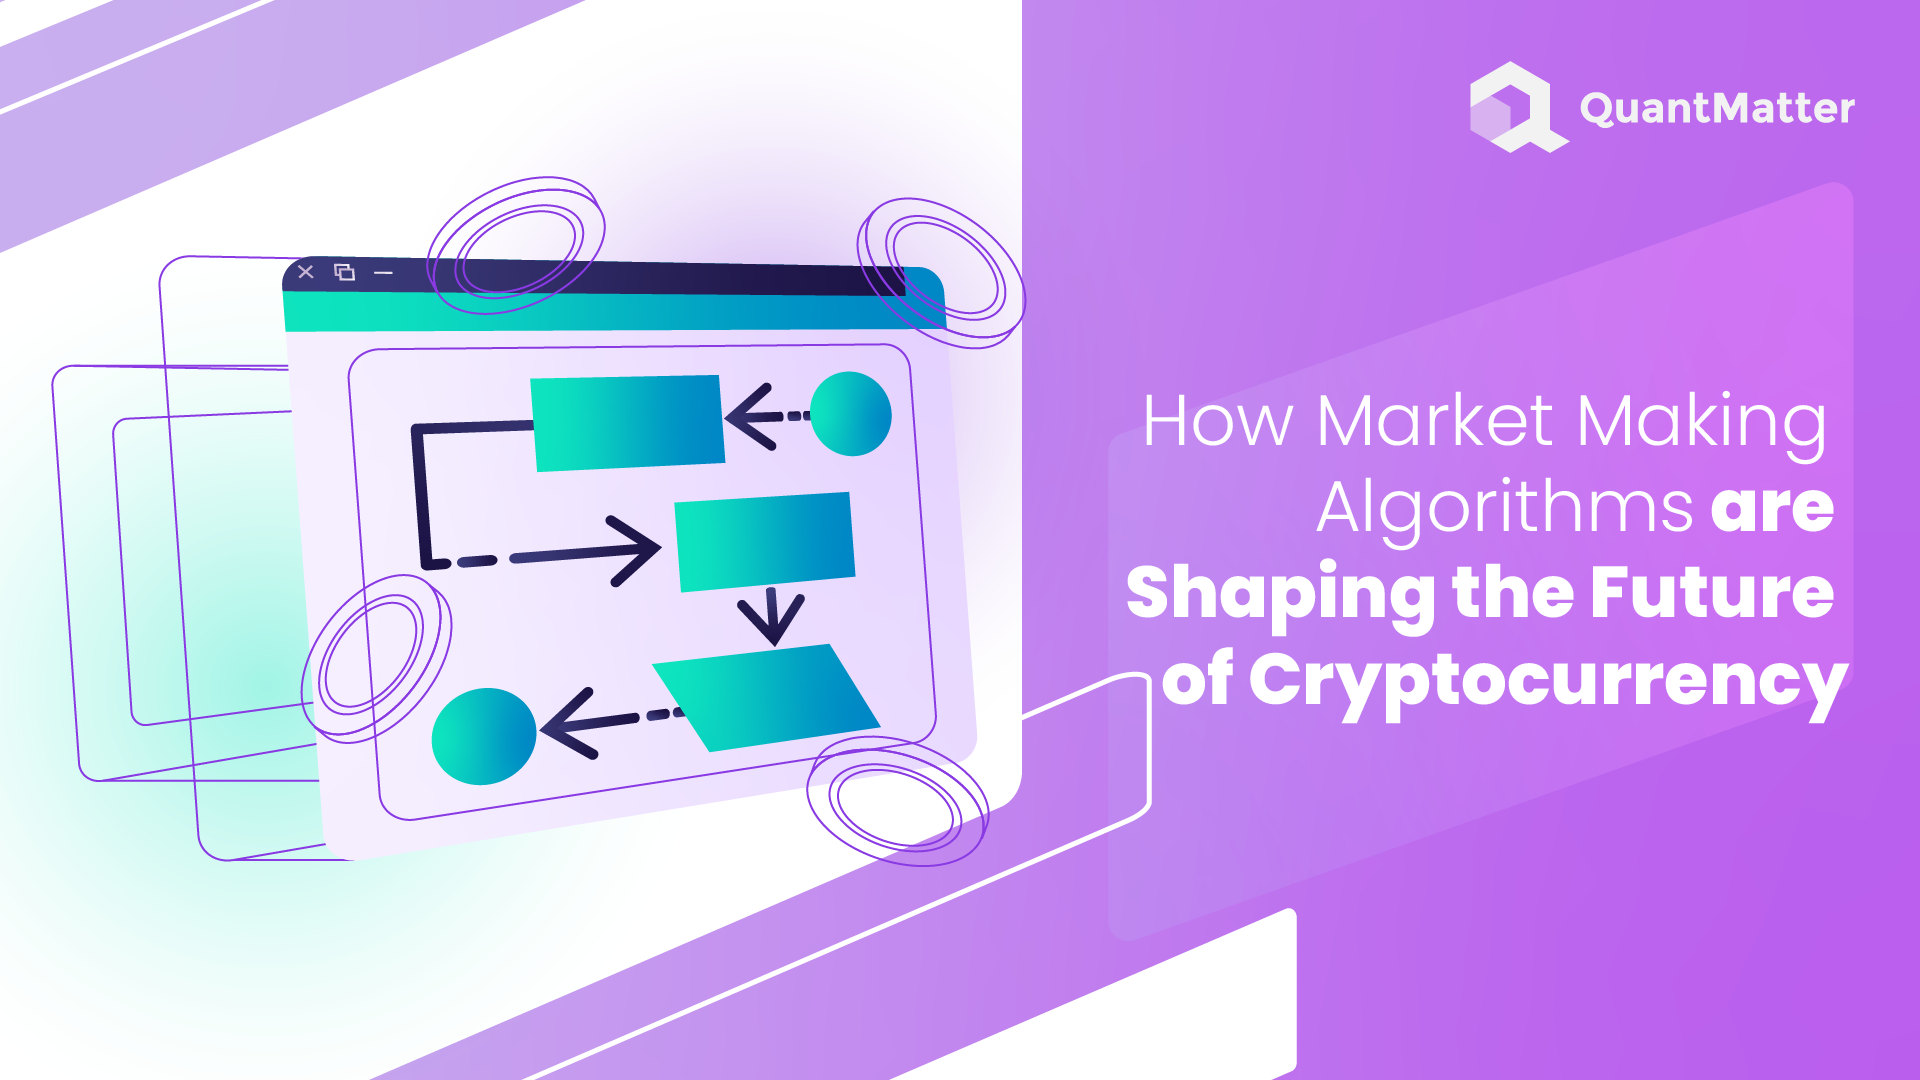 How Market Making Algorithms are Shaping the Future of Cryptocurrency